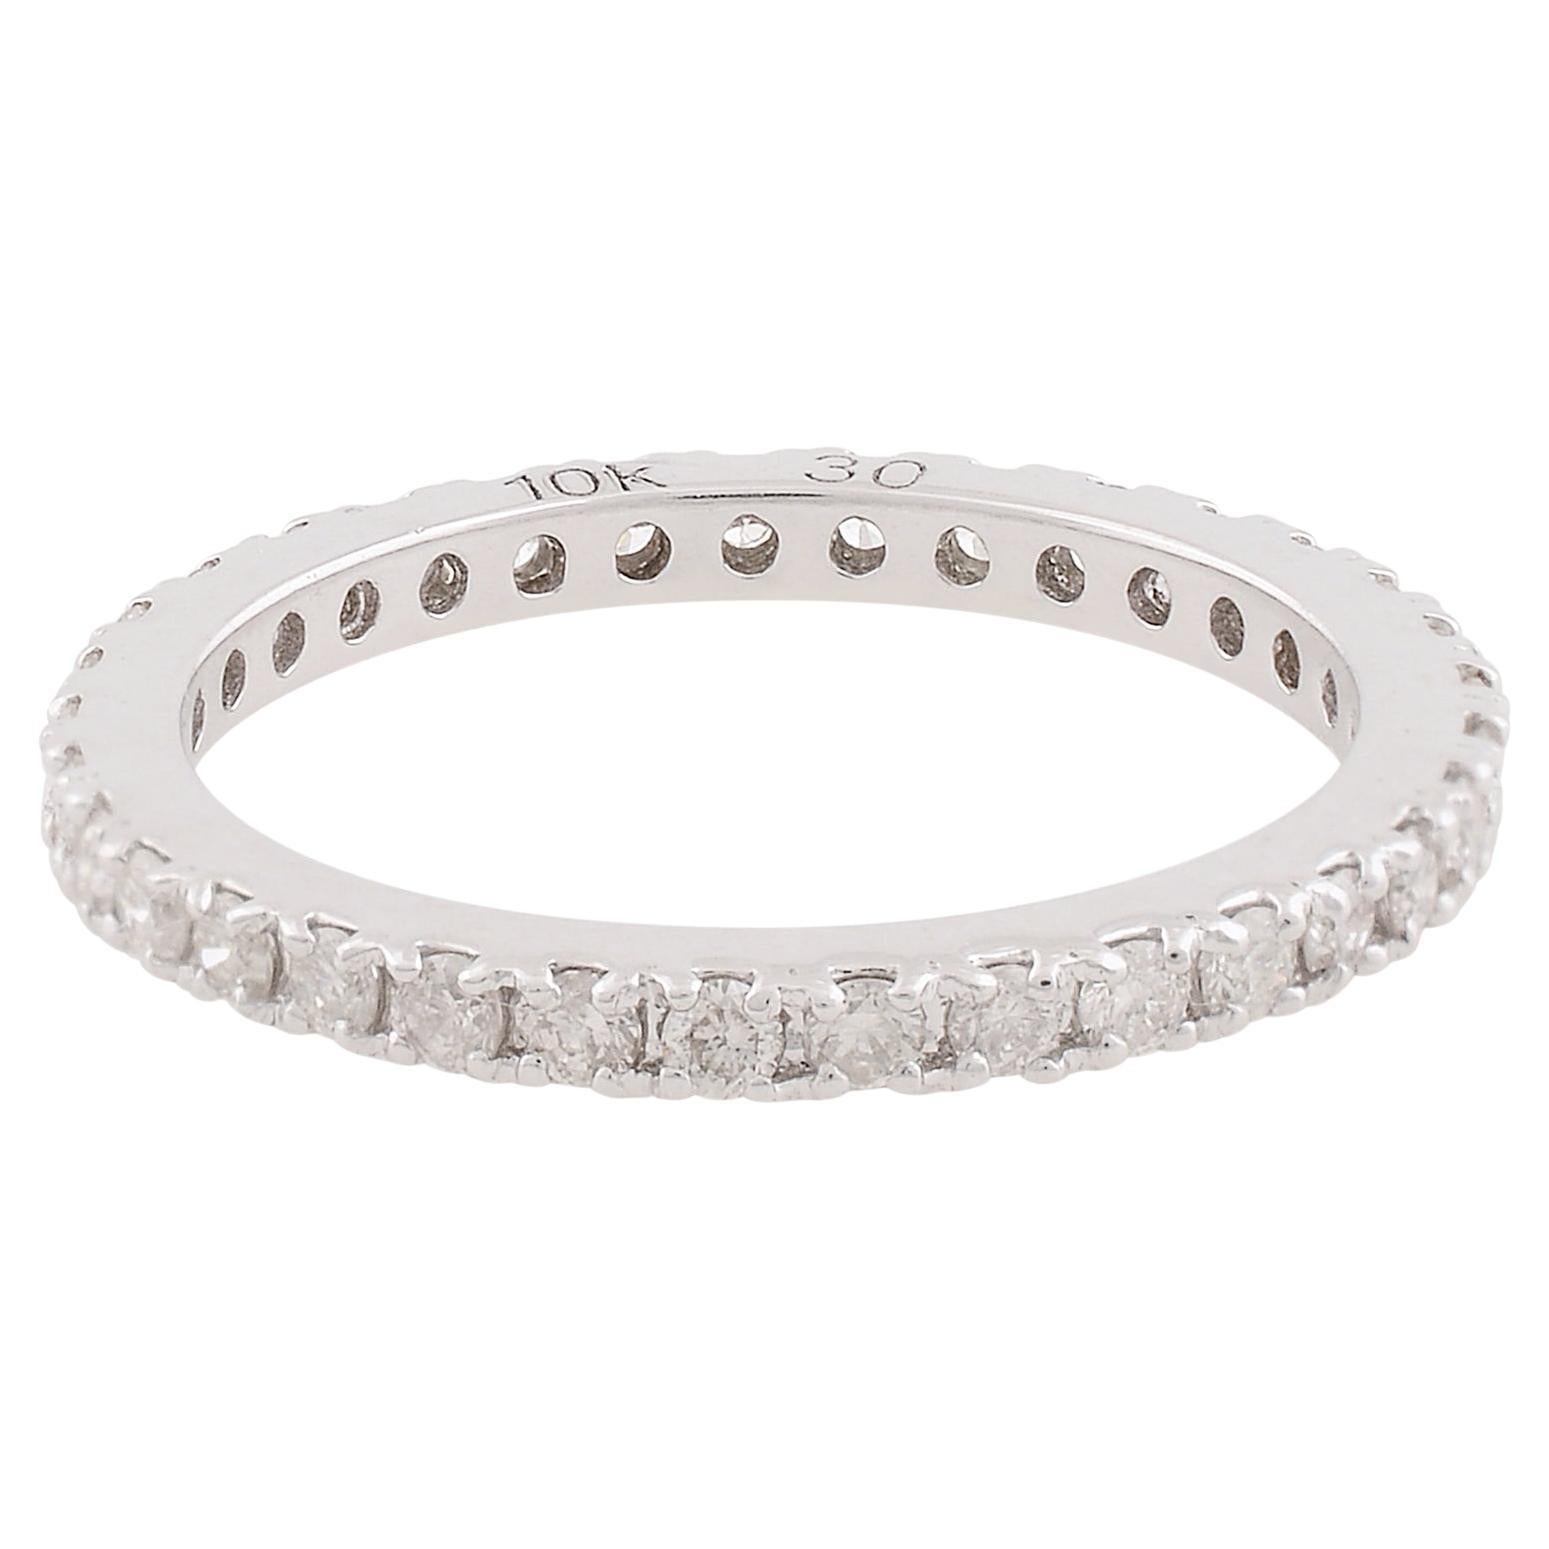 0.63 Carat Pave Diamond Eternity Band Ring Solid 10k White Gold Jewelry